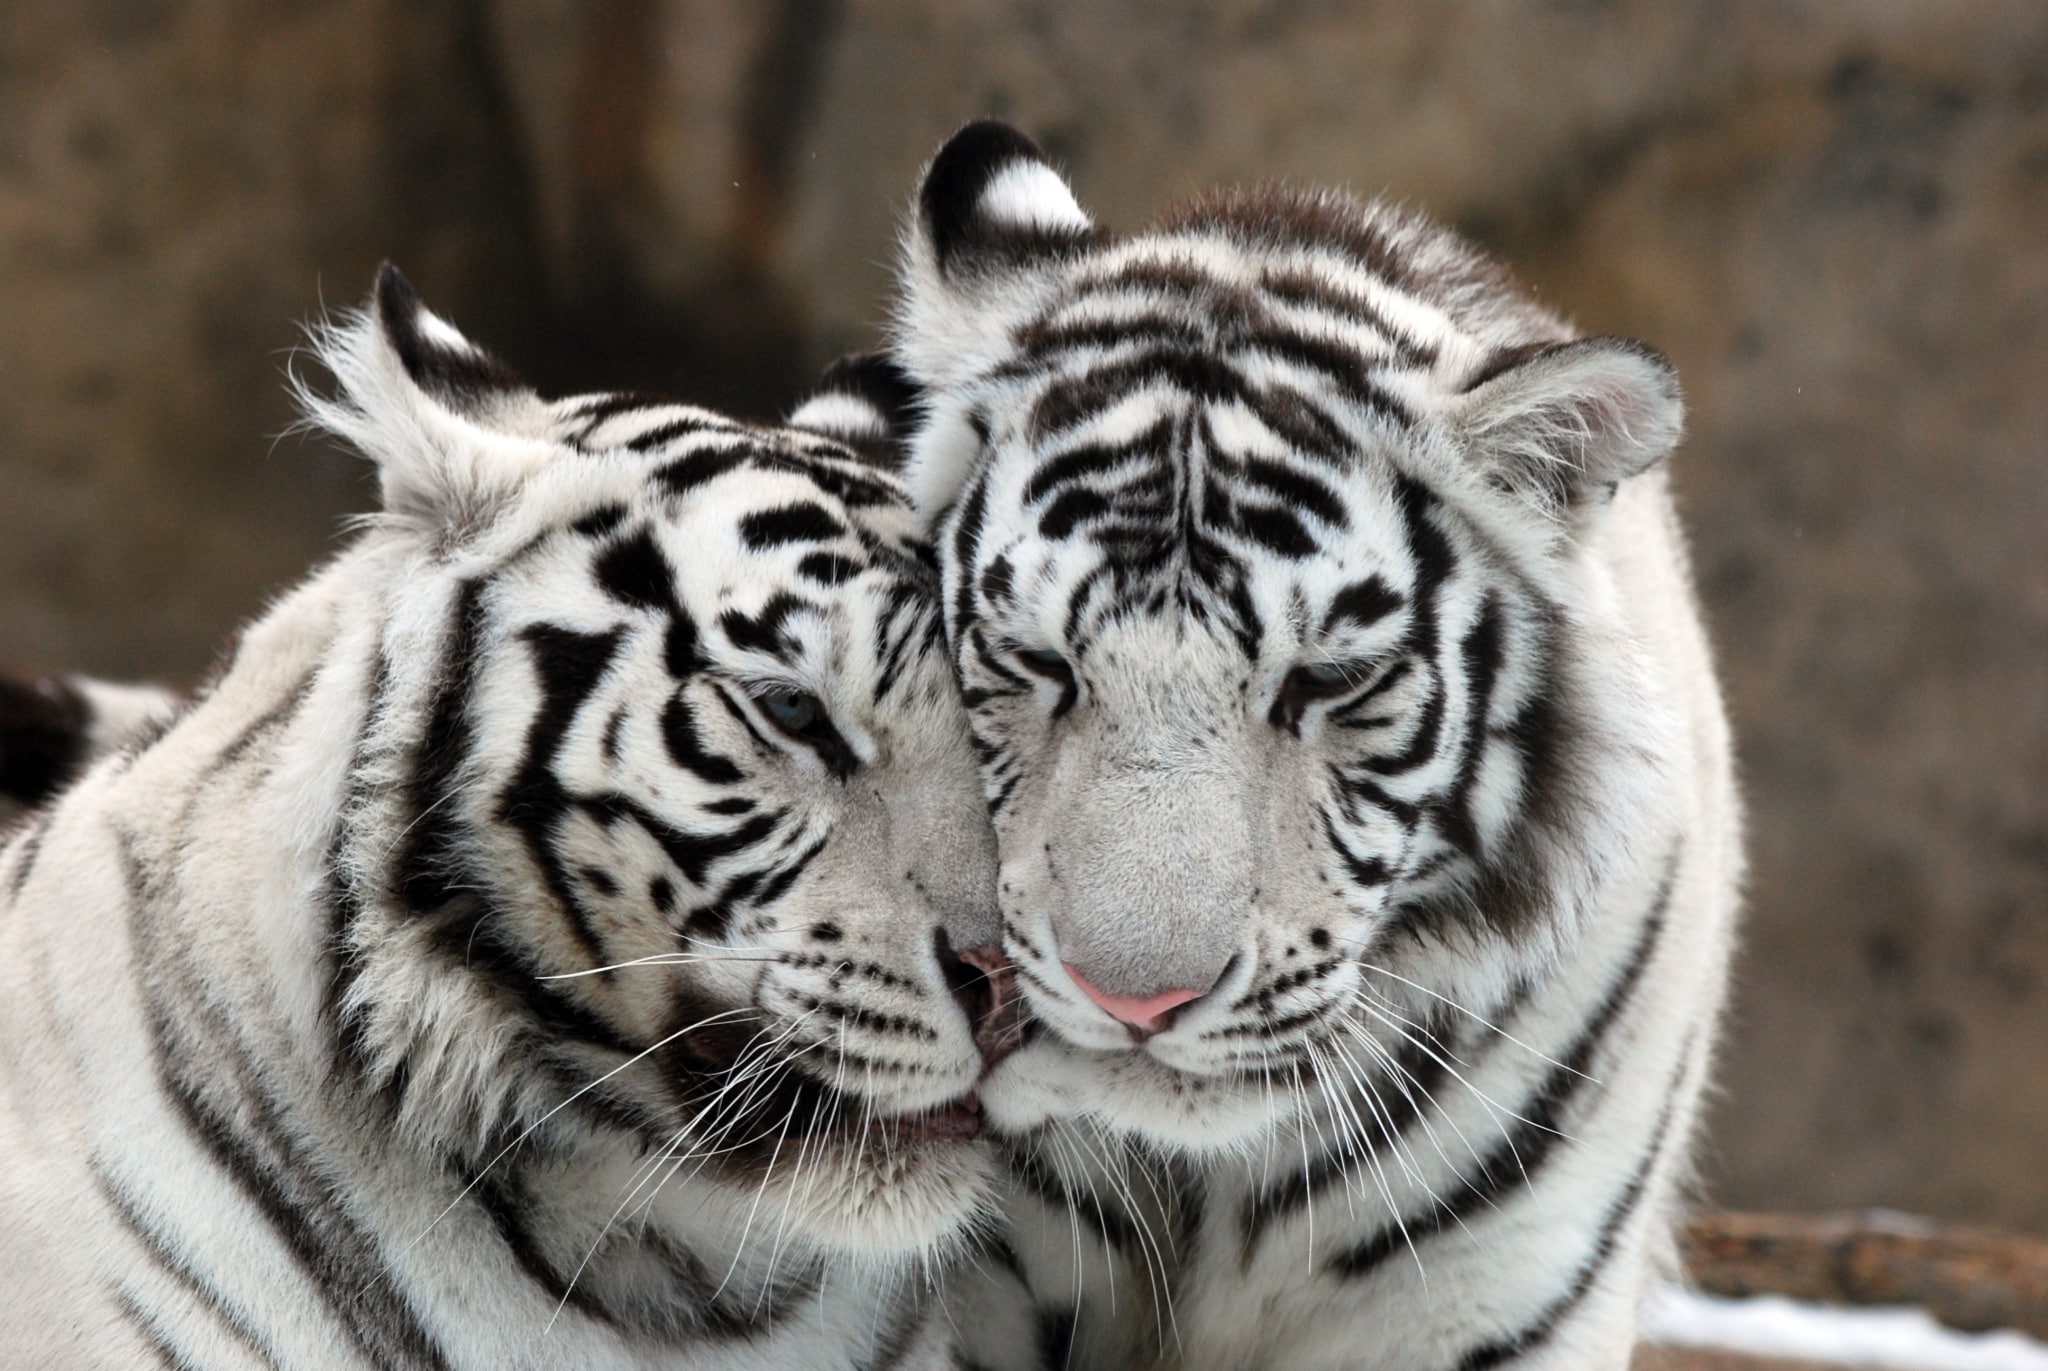 White tigers nuzzling their faces together